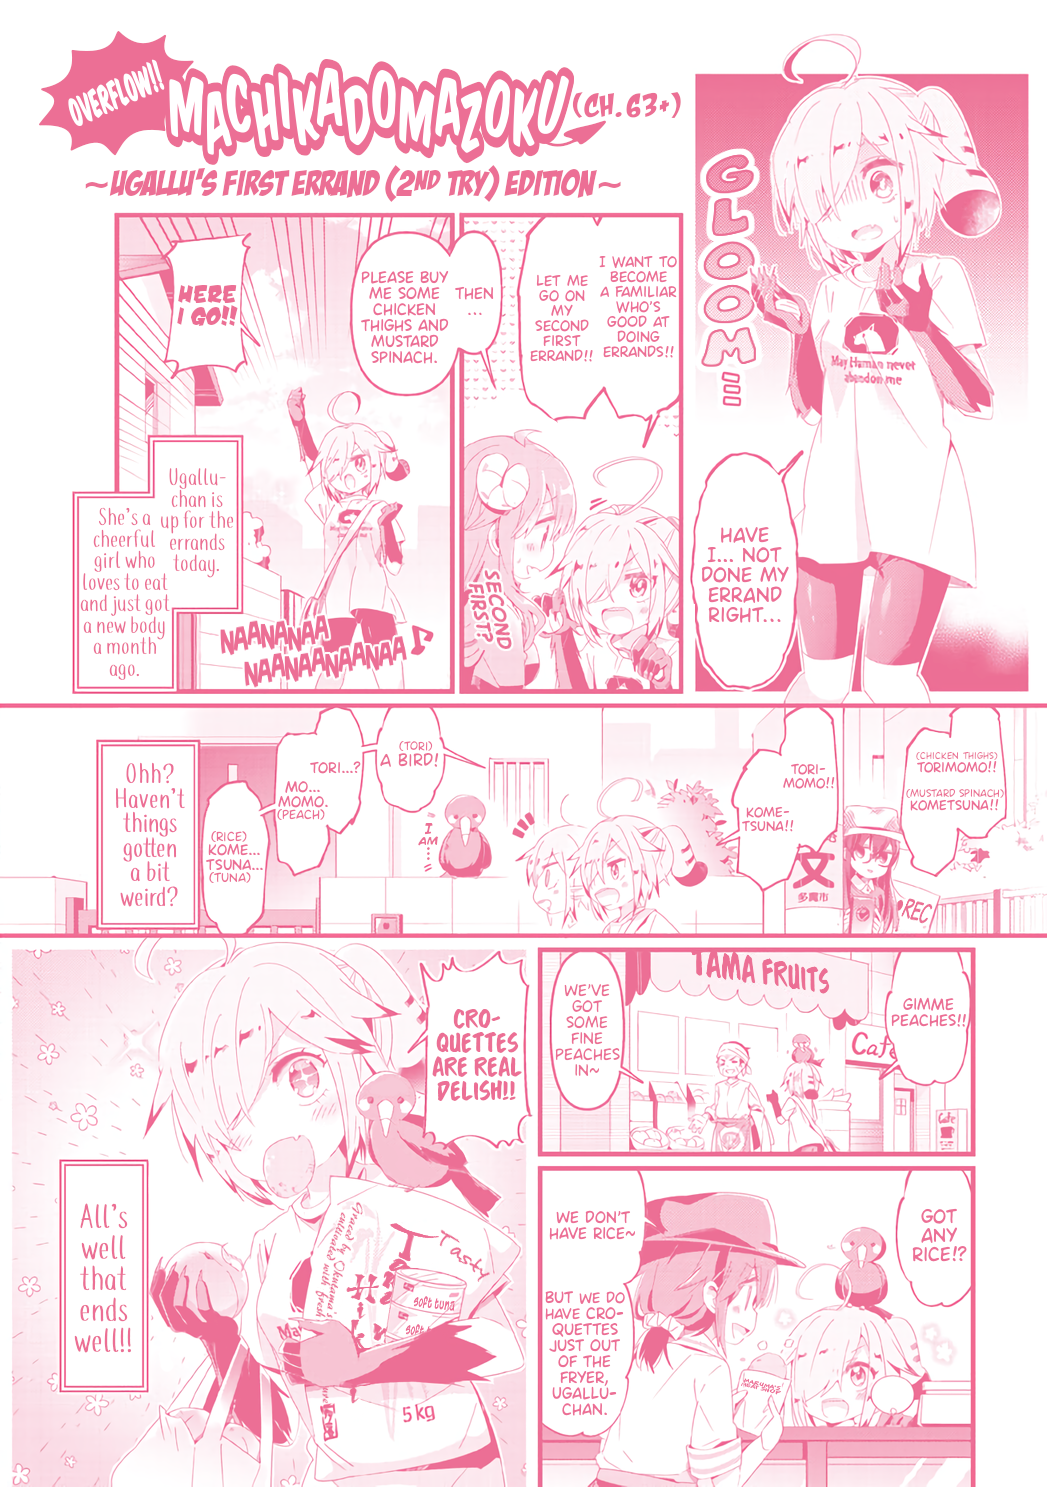 Machikado Mazoku Vol.5 Chapter 64.5: Extra And Volume 5 Contents - Picture 1